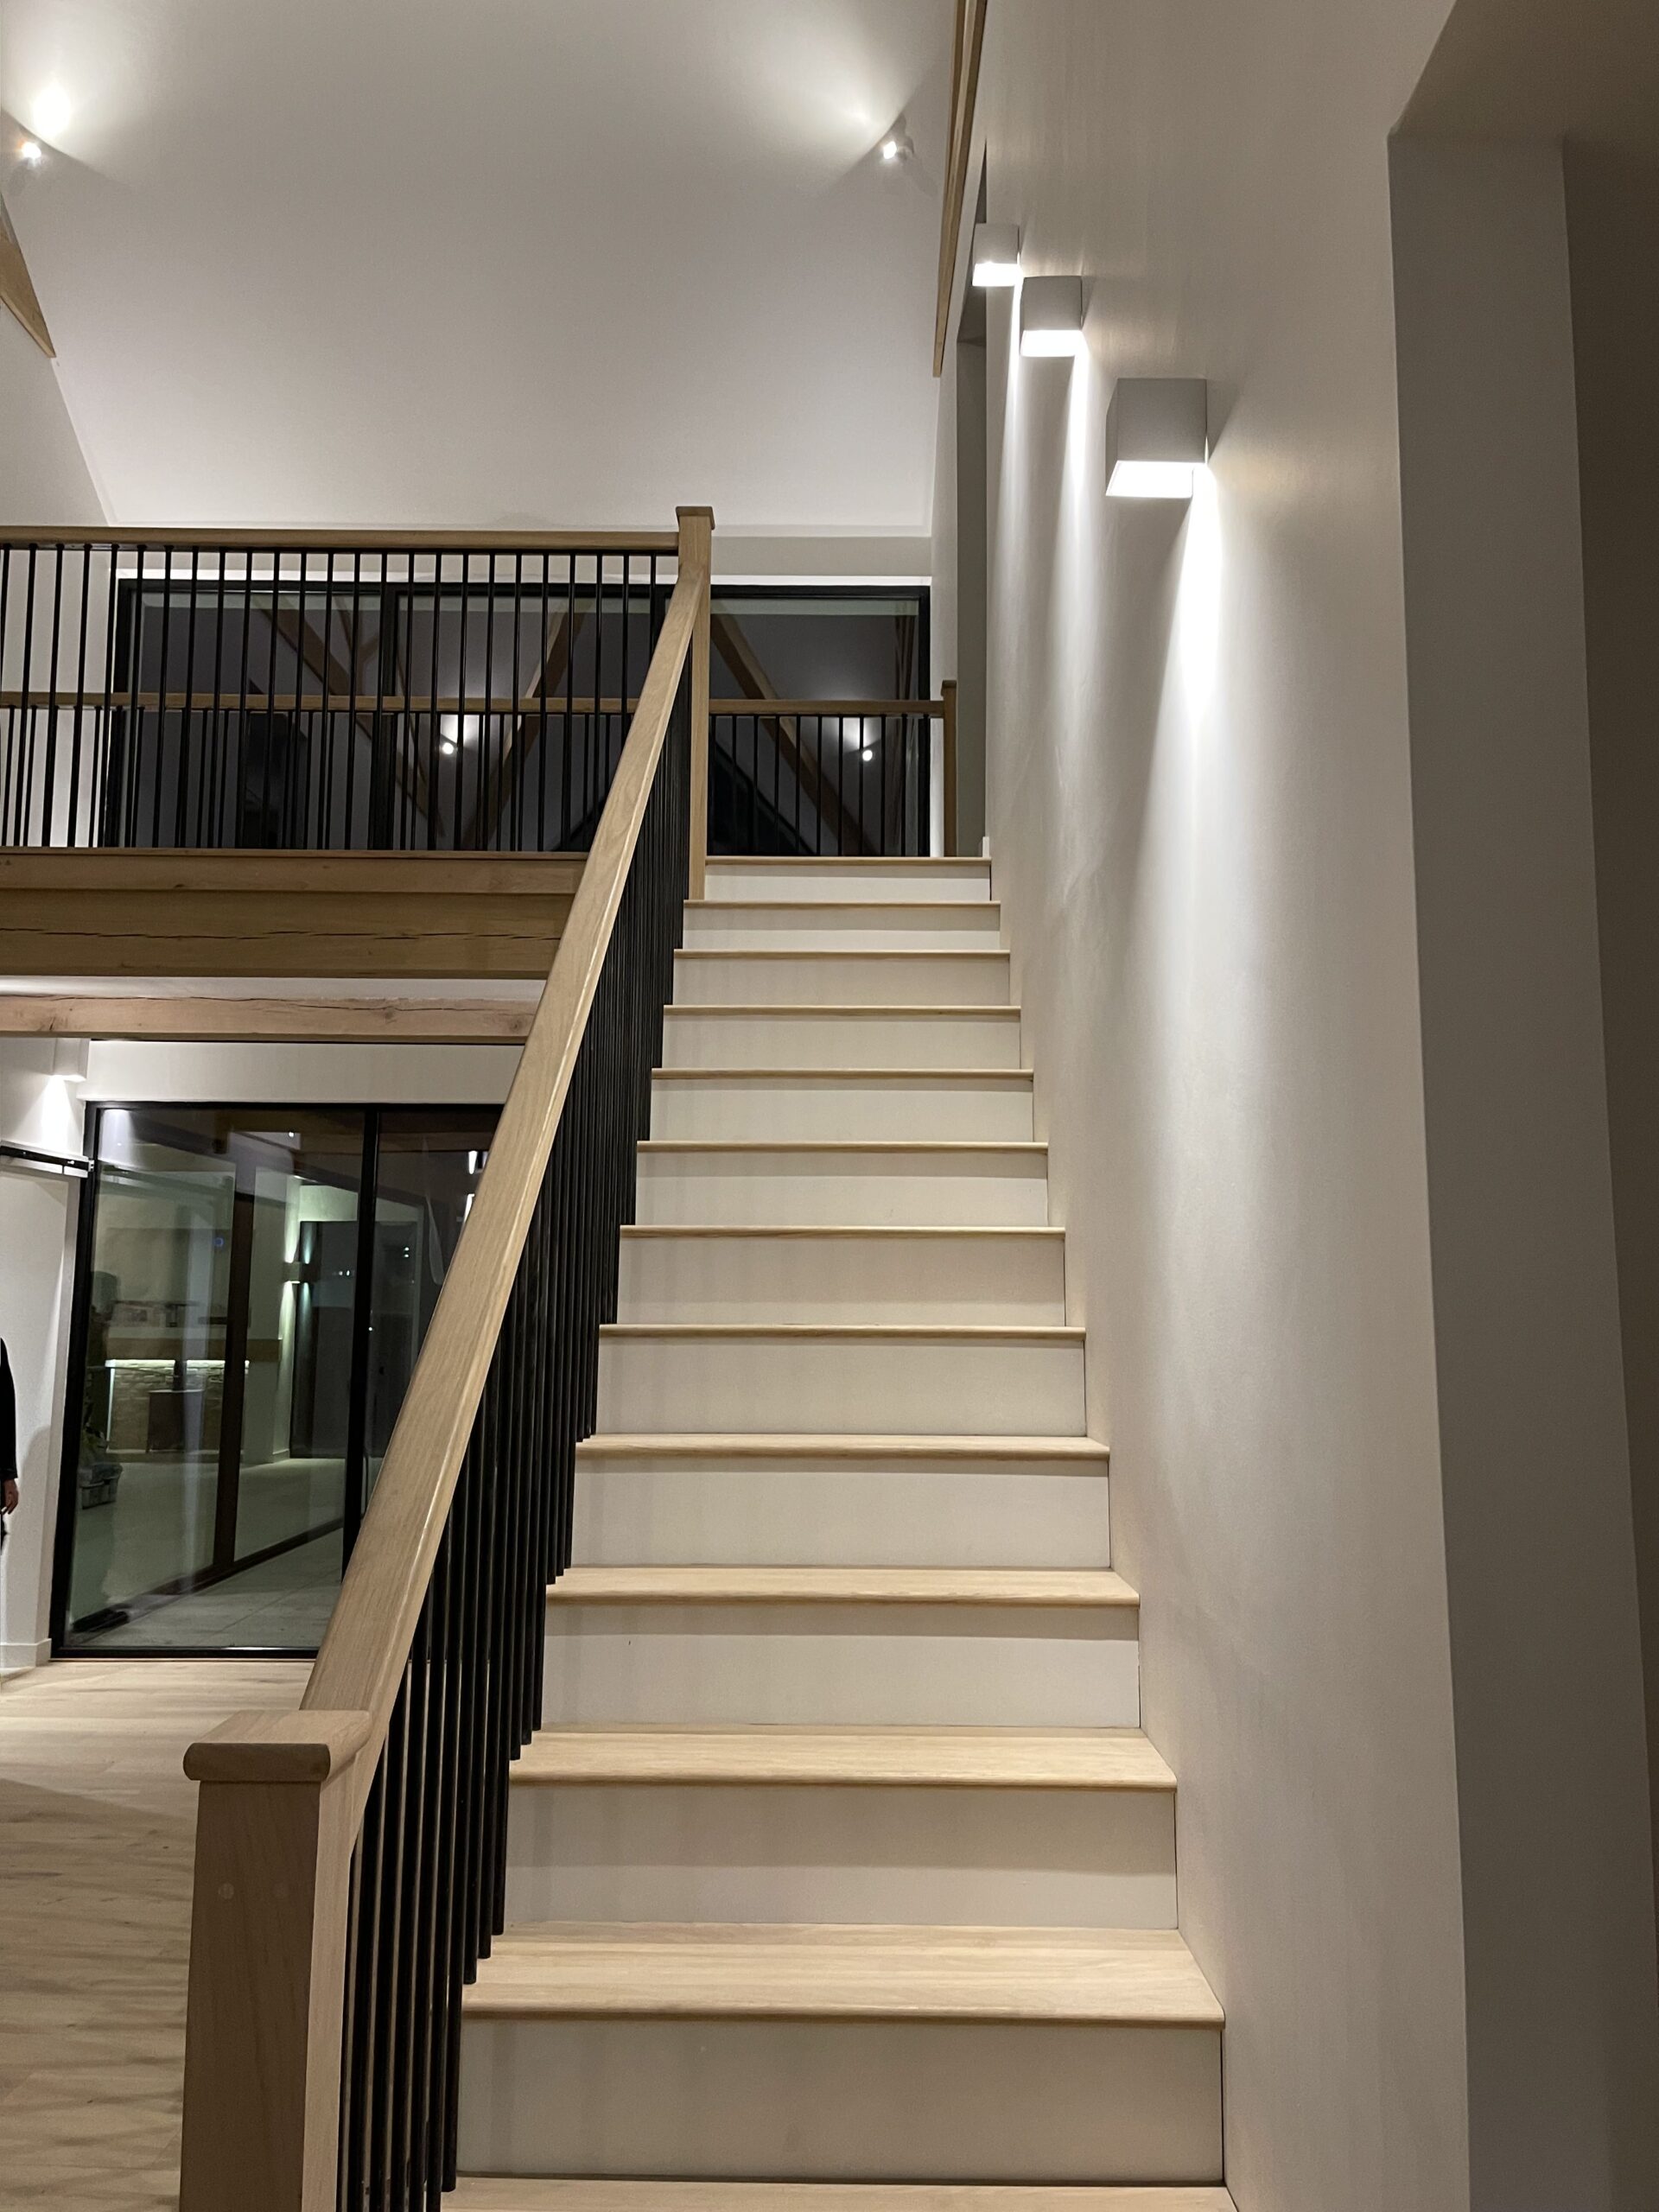 Suffolk home interior in the hallway with lighting up the side of the staircase and full length glass windows